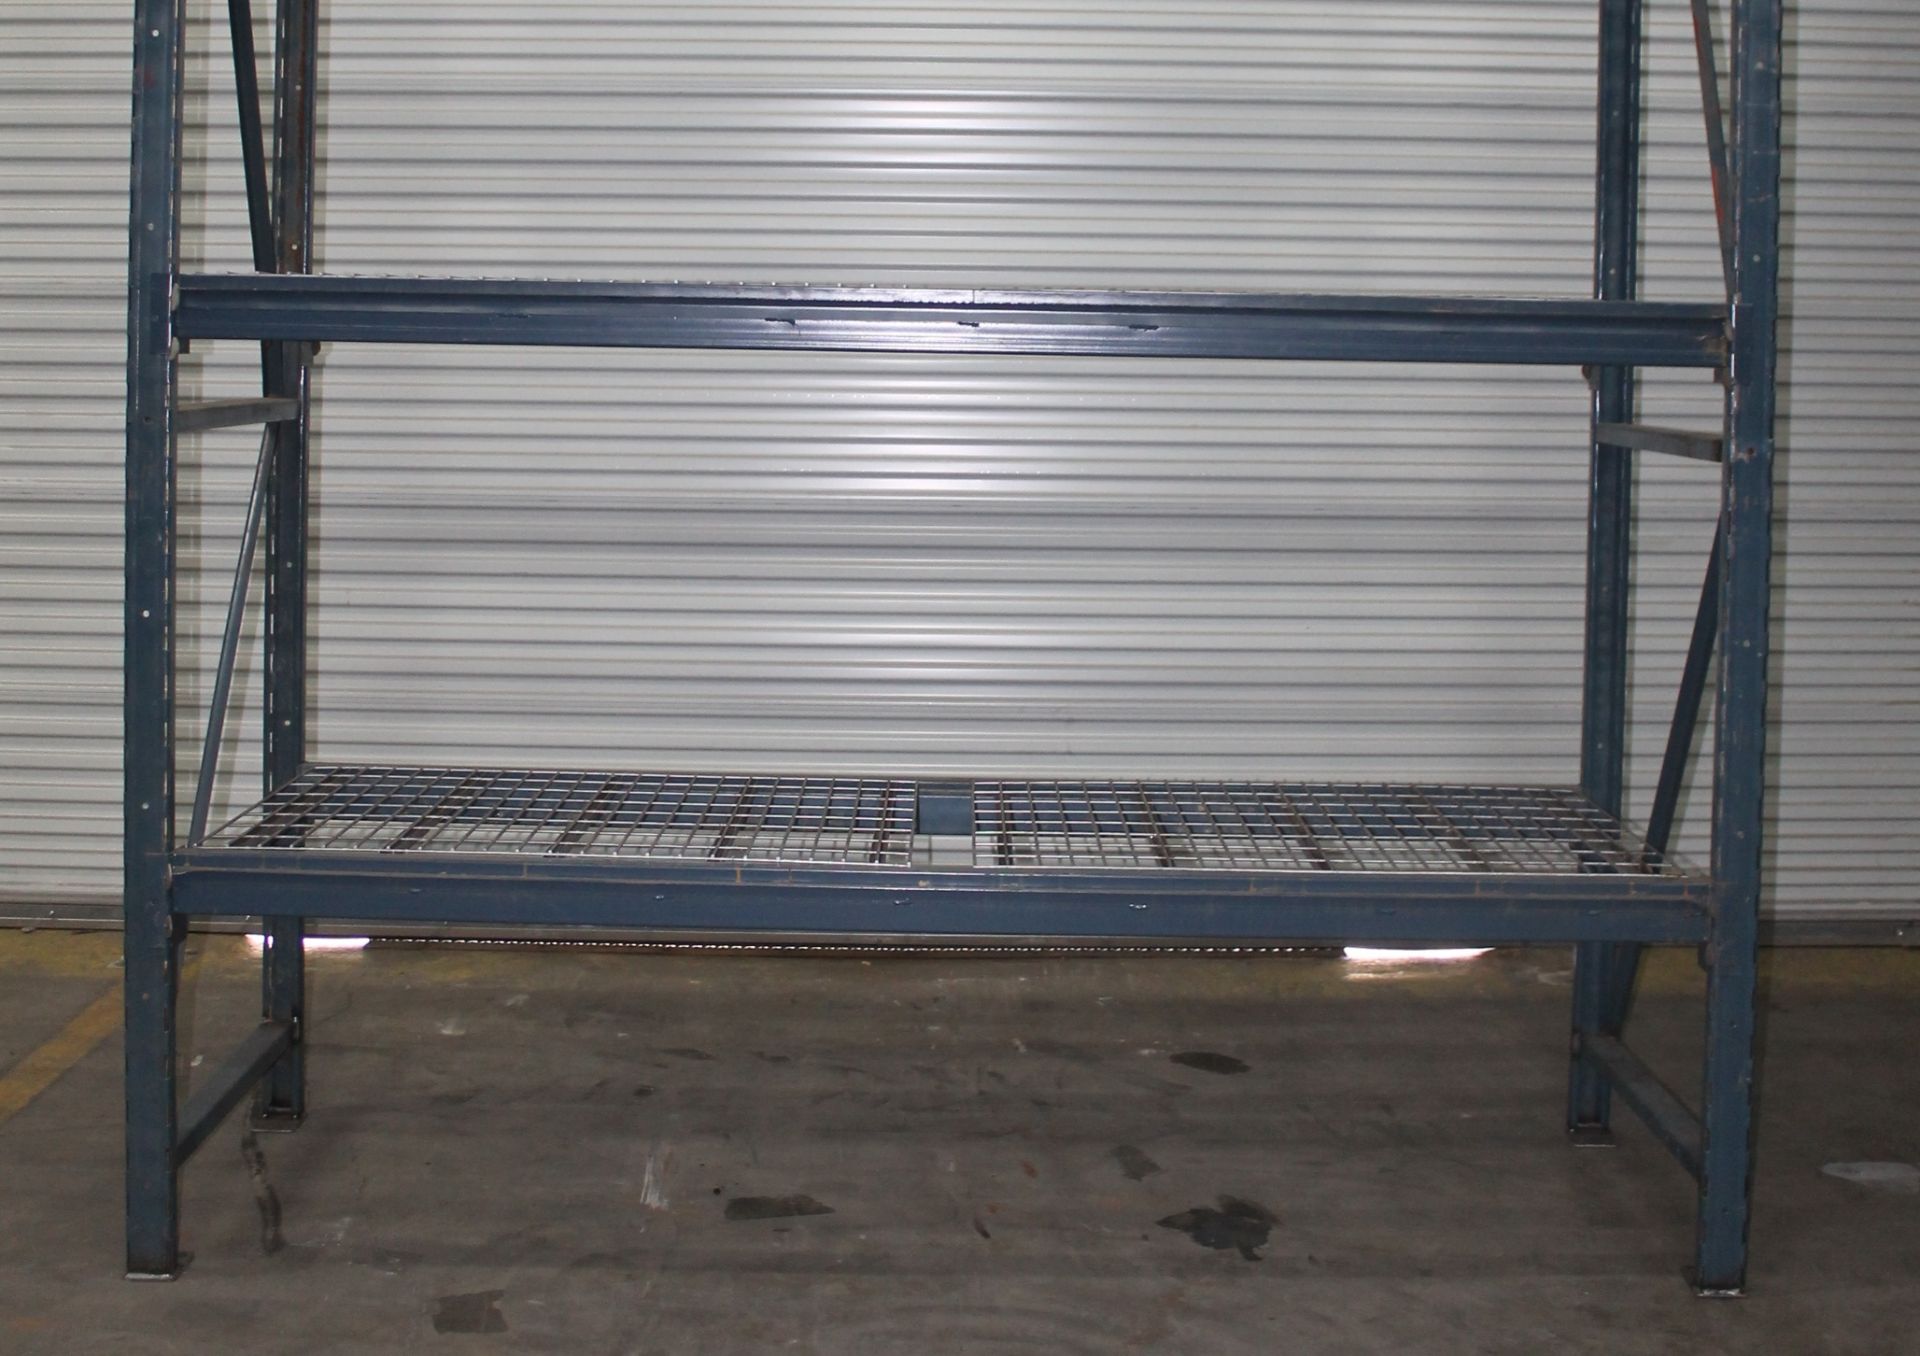 96"H X 36"D X 96"L STOCK ROOM SHELVING, TOTAL 14 SECTIONS WITH 2 BEAM LEVELS EACH,  INCLUDES